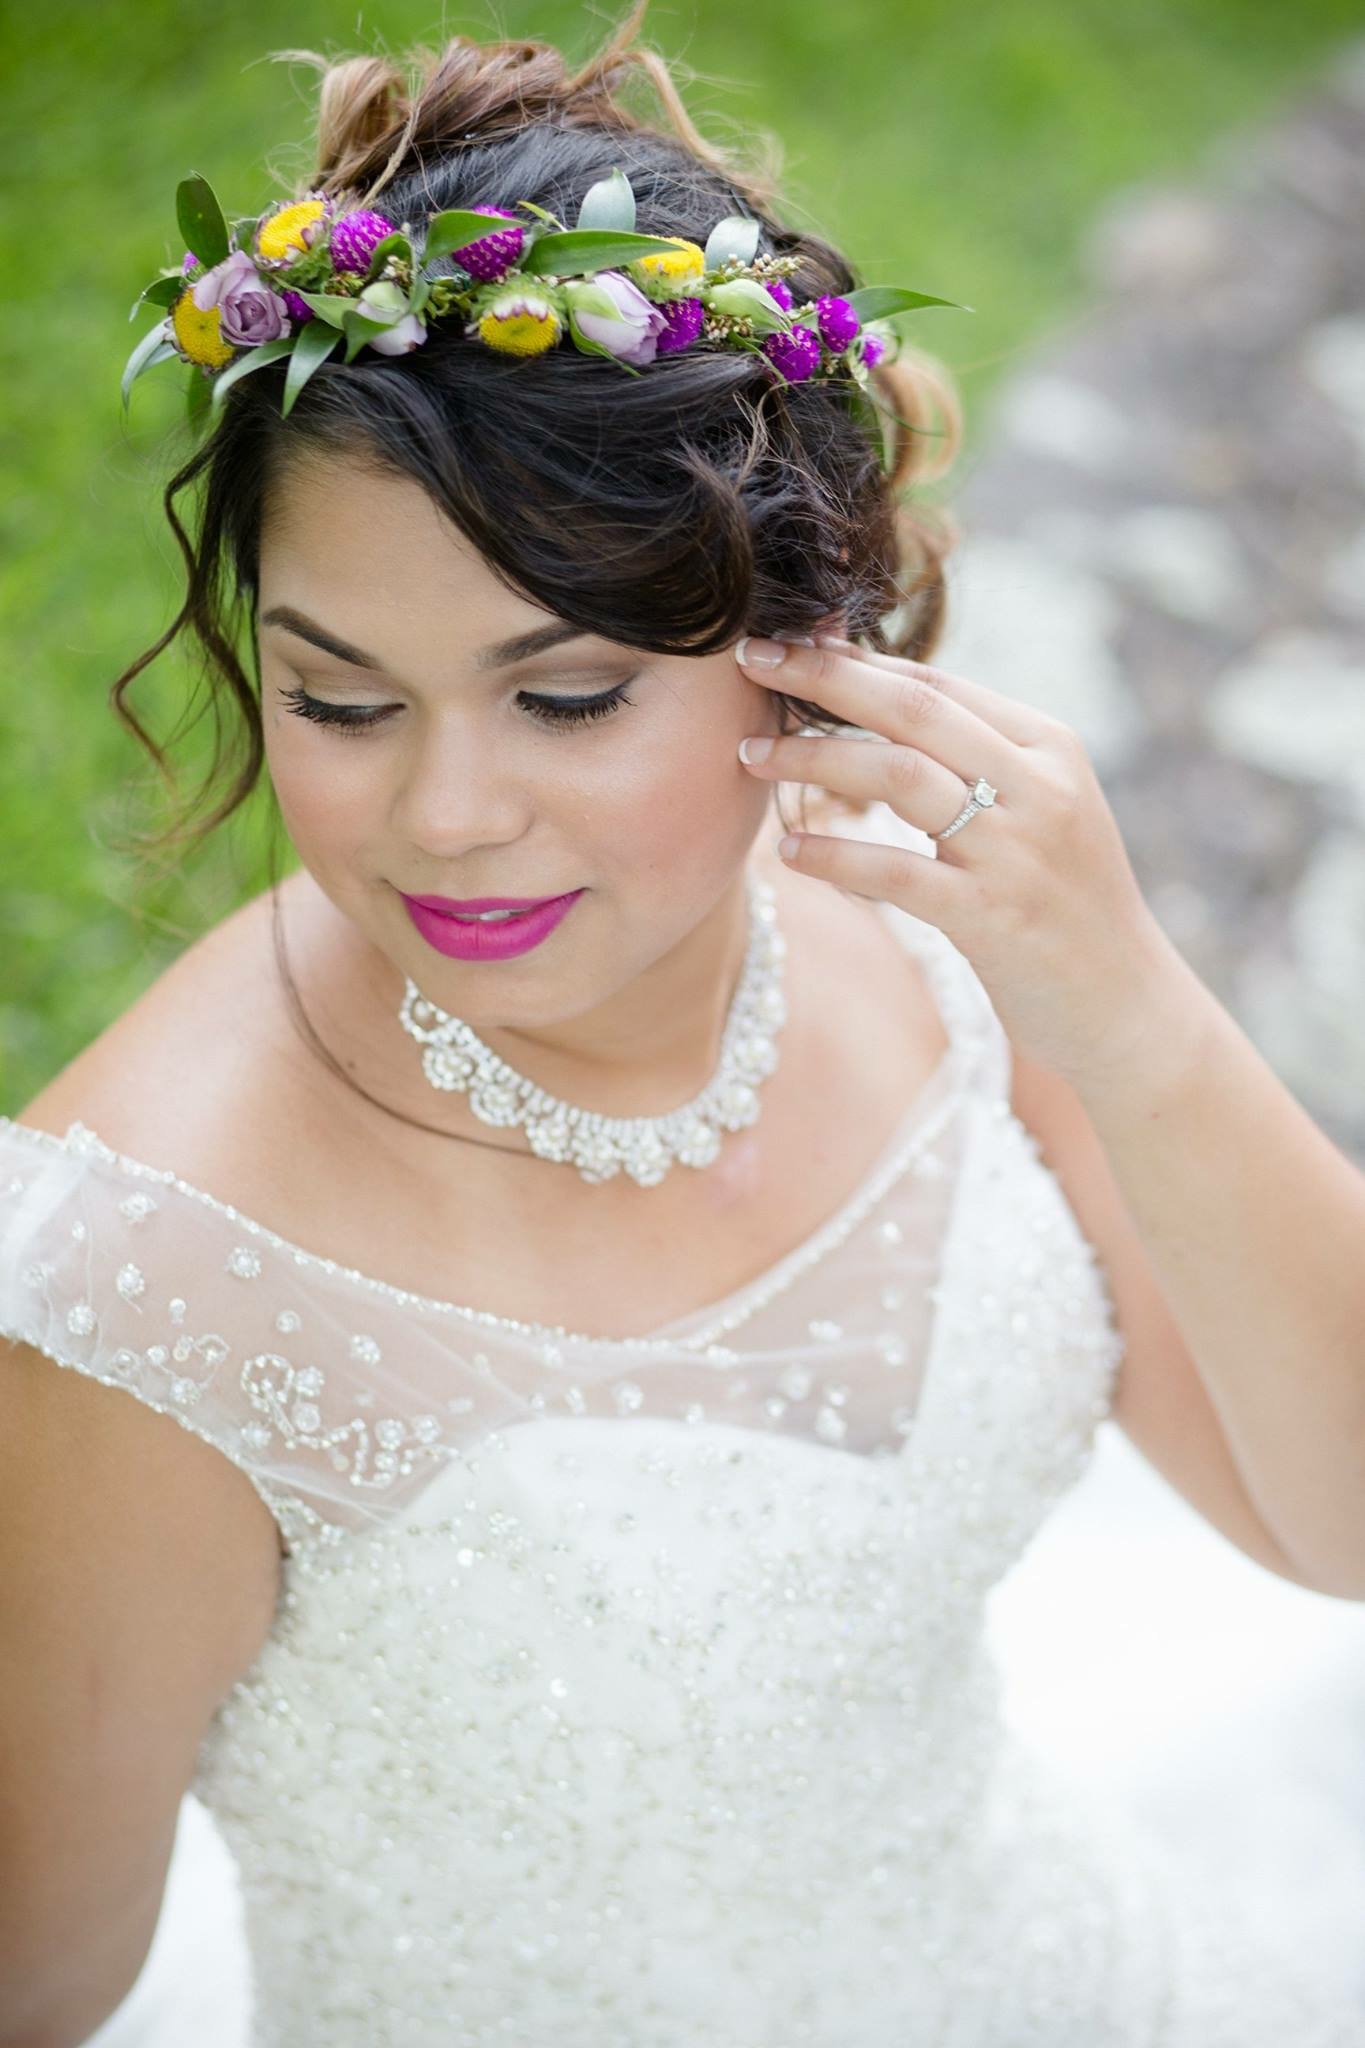 Professional Hair and Makeup for your Wedding Day in Central Arkansas